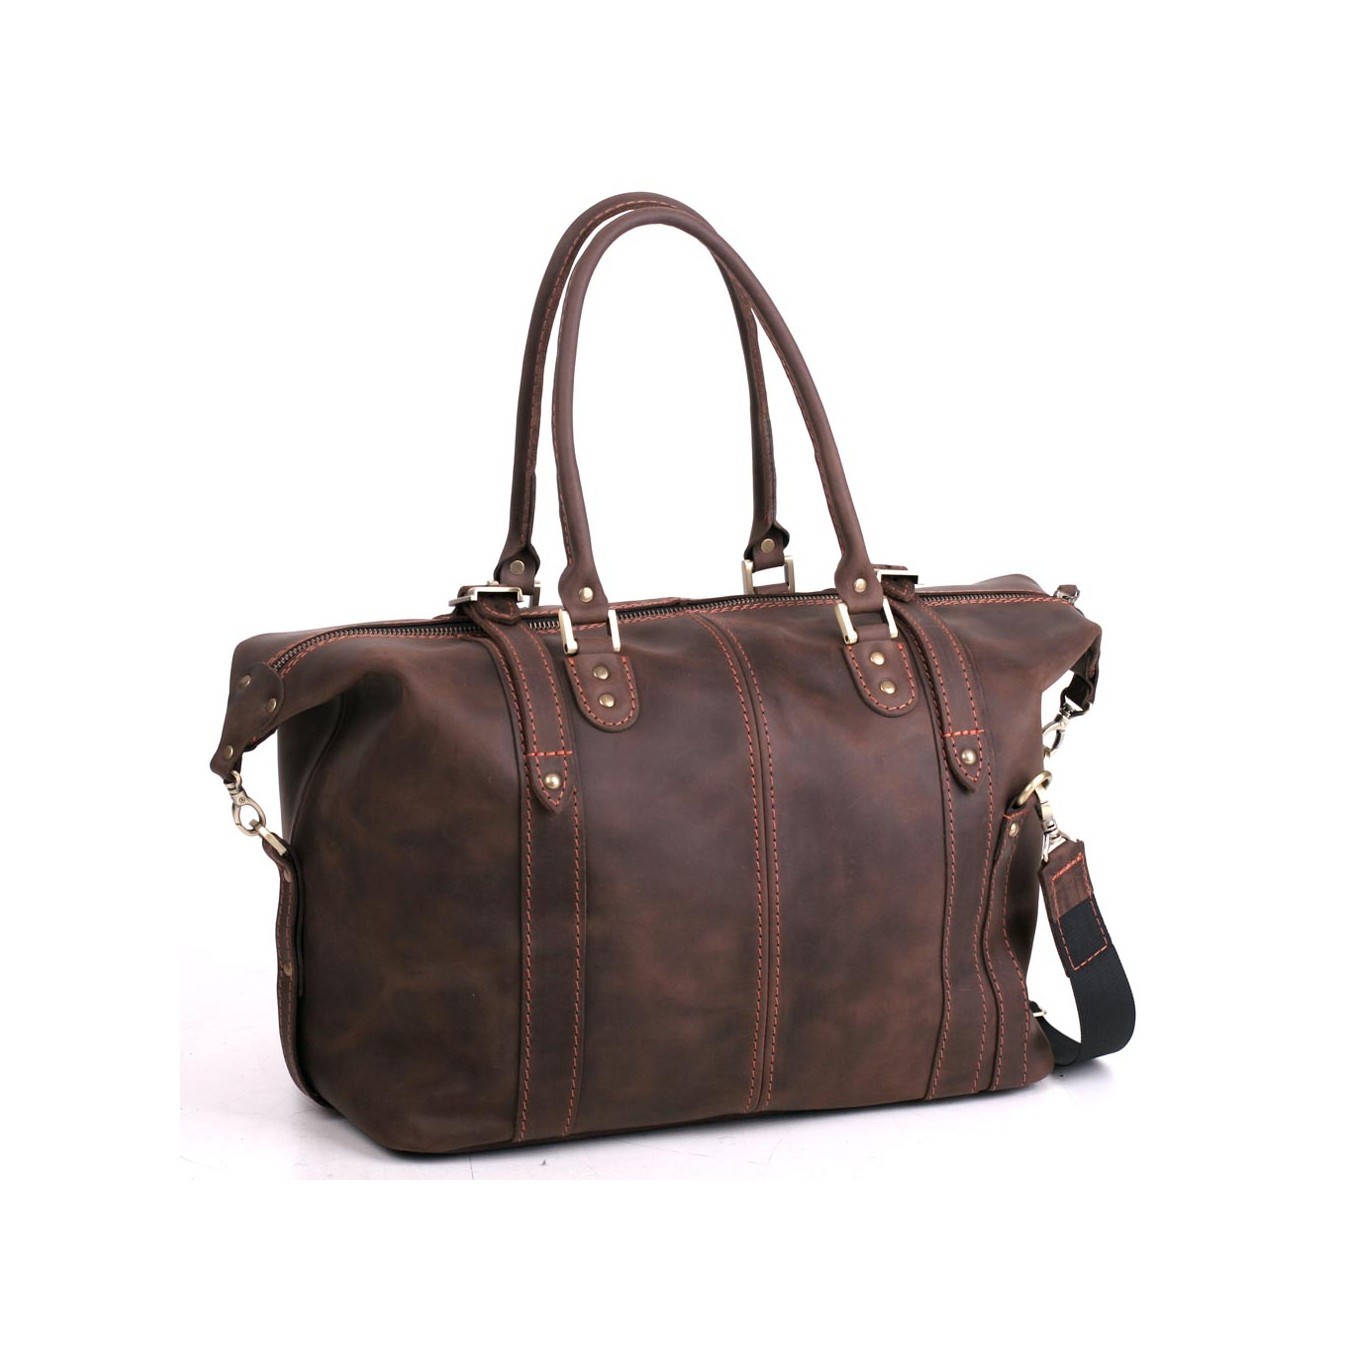 Stylish brown travel bag made of crazy horse leather